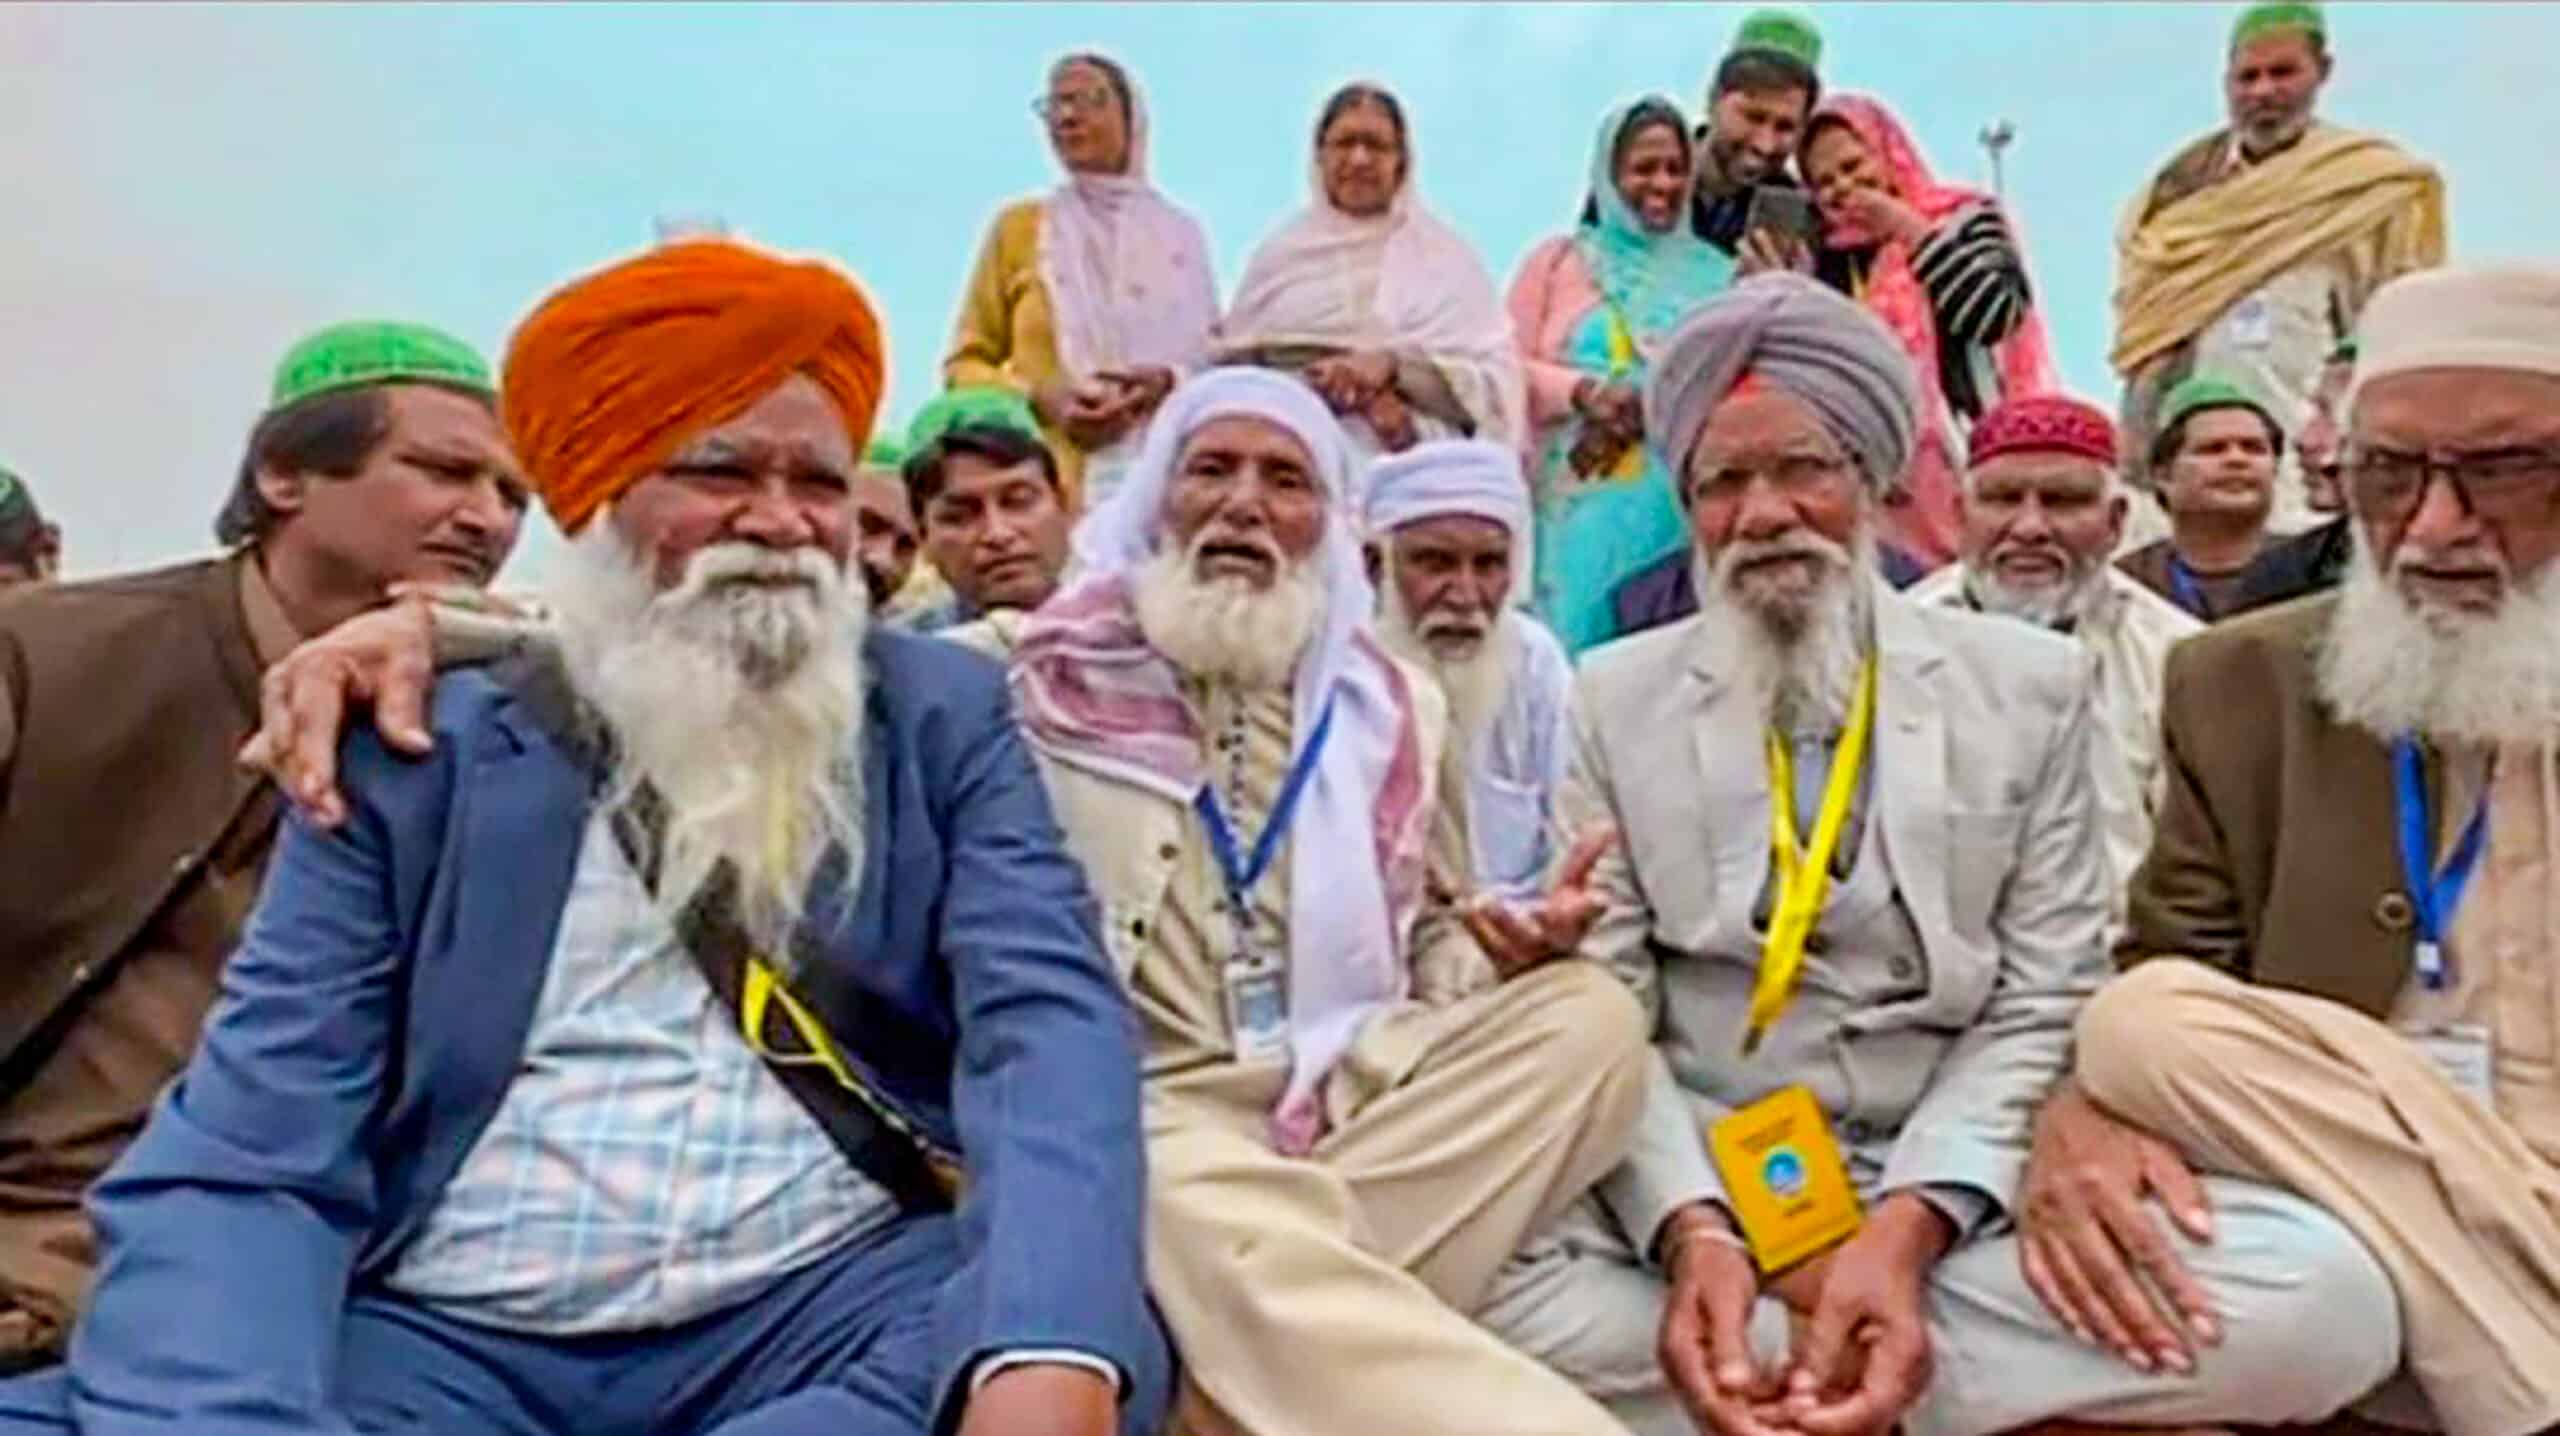 Social media reunites Sikh family separated at the time of Partition